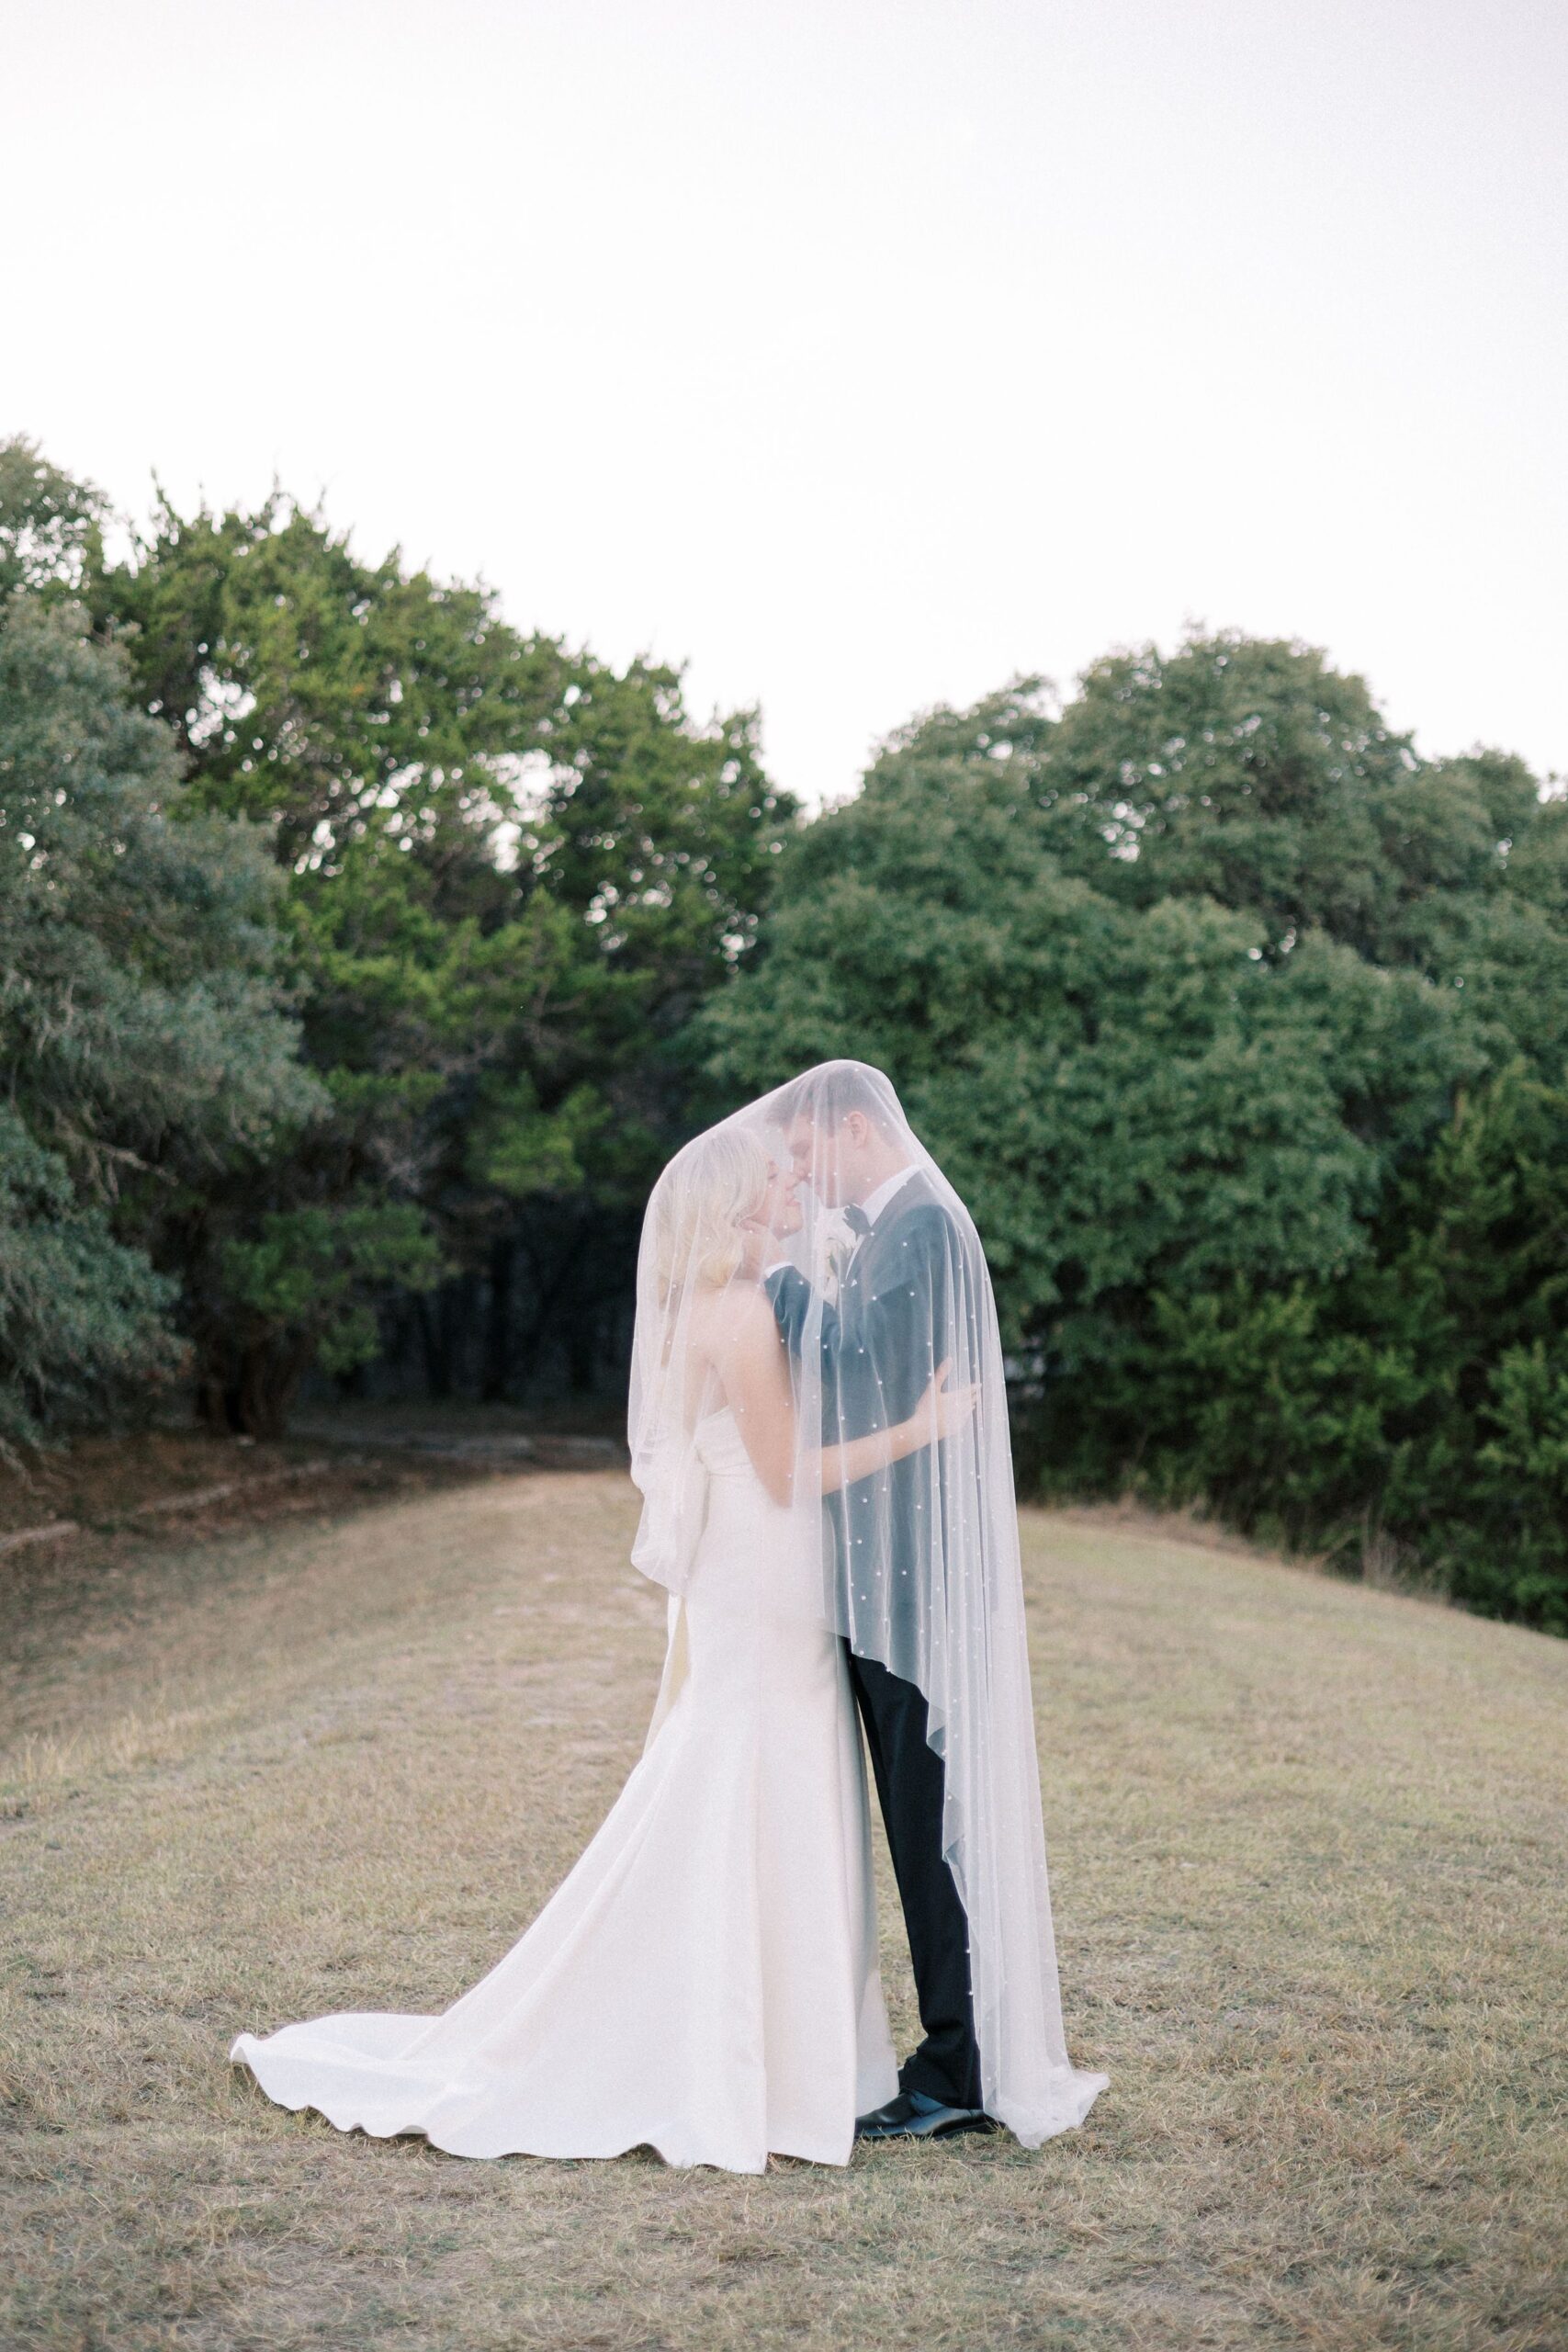 Lillie and Trey's Love Story Love Story Landed Them in Vogue Satin trumpet-style gown How Lillie and Trey's Love Story Landed Them in Vogue: A Look at Their Dreamy Wedding